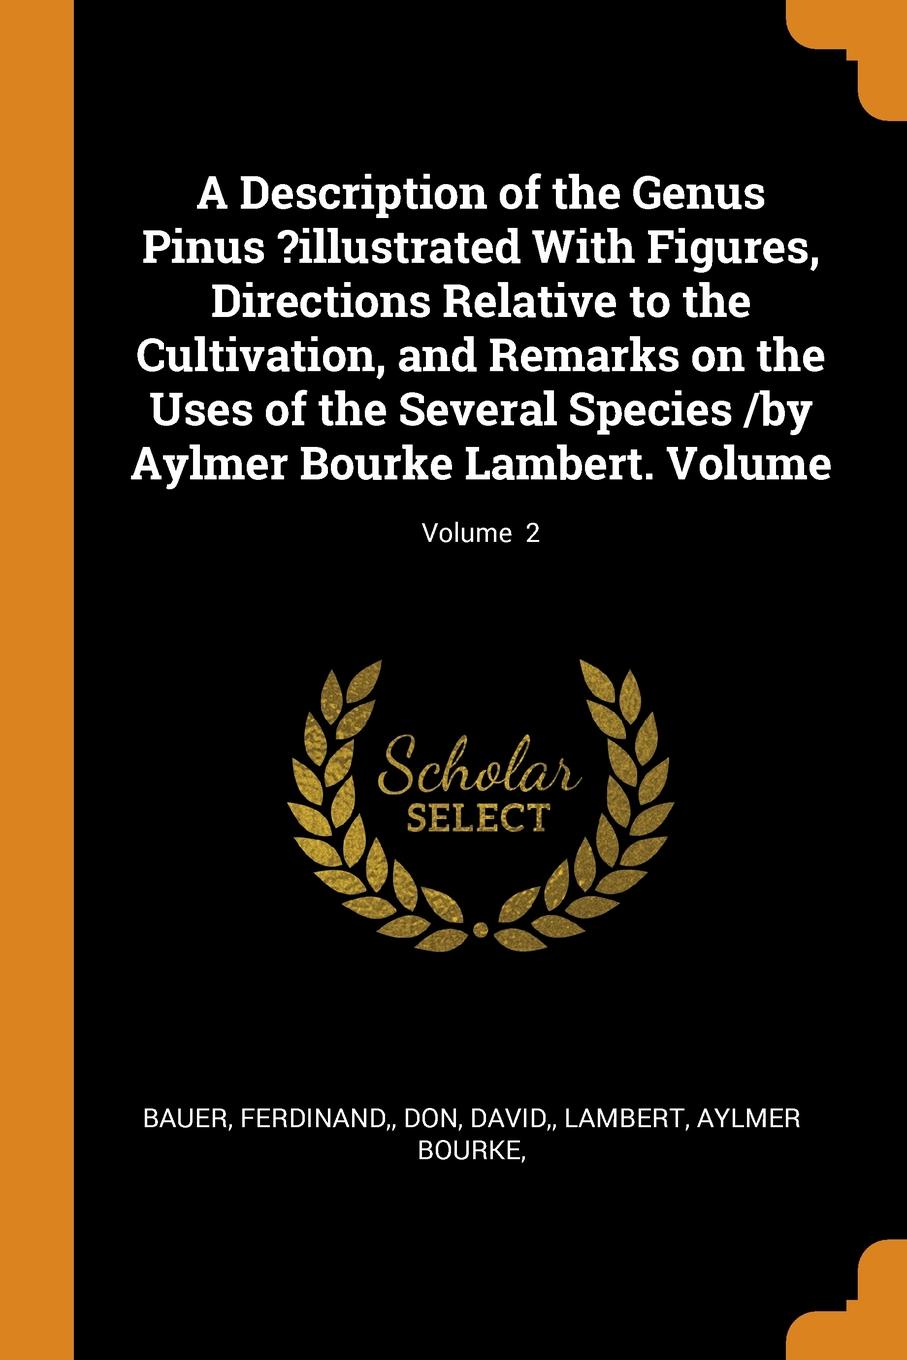 A Description of the Genus Pinus .illustrated With Figures, Directions Relative to the Cultivation, and Remarks on the Uses of the Several Species /by Aylmer Bourke Lambert. Volume; Volume  2